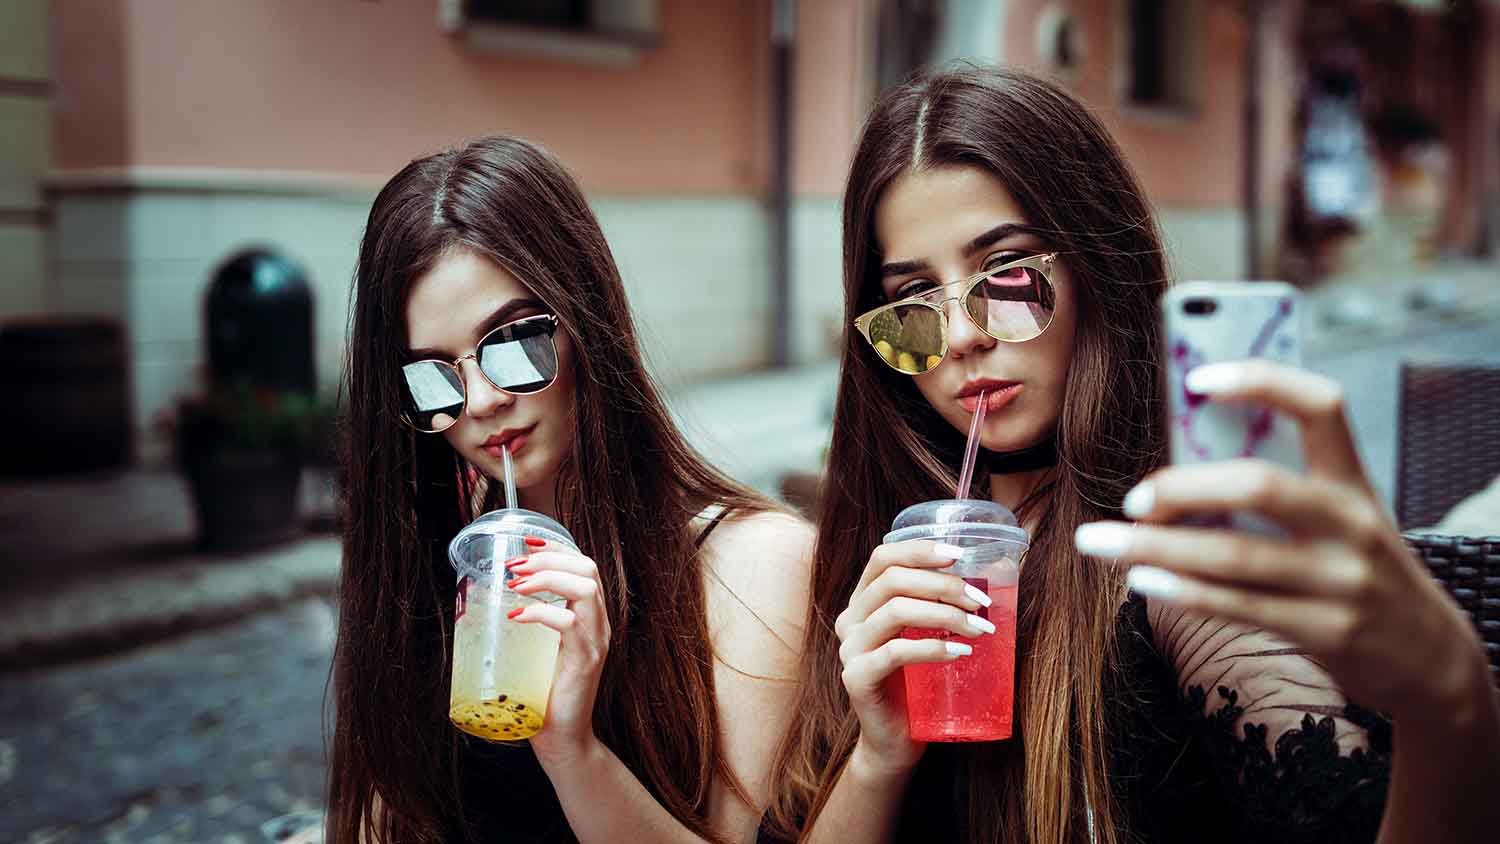 Two women in sunglasses taking a selfie while drinking colorful beverages